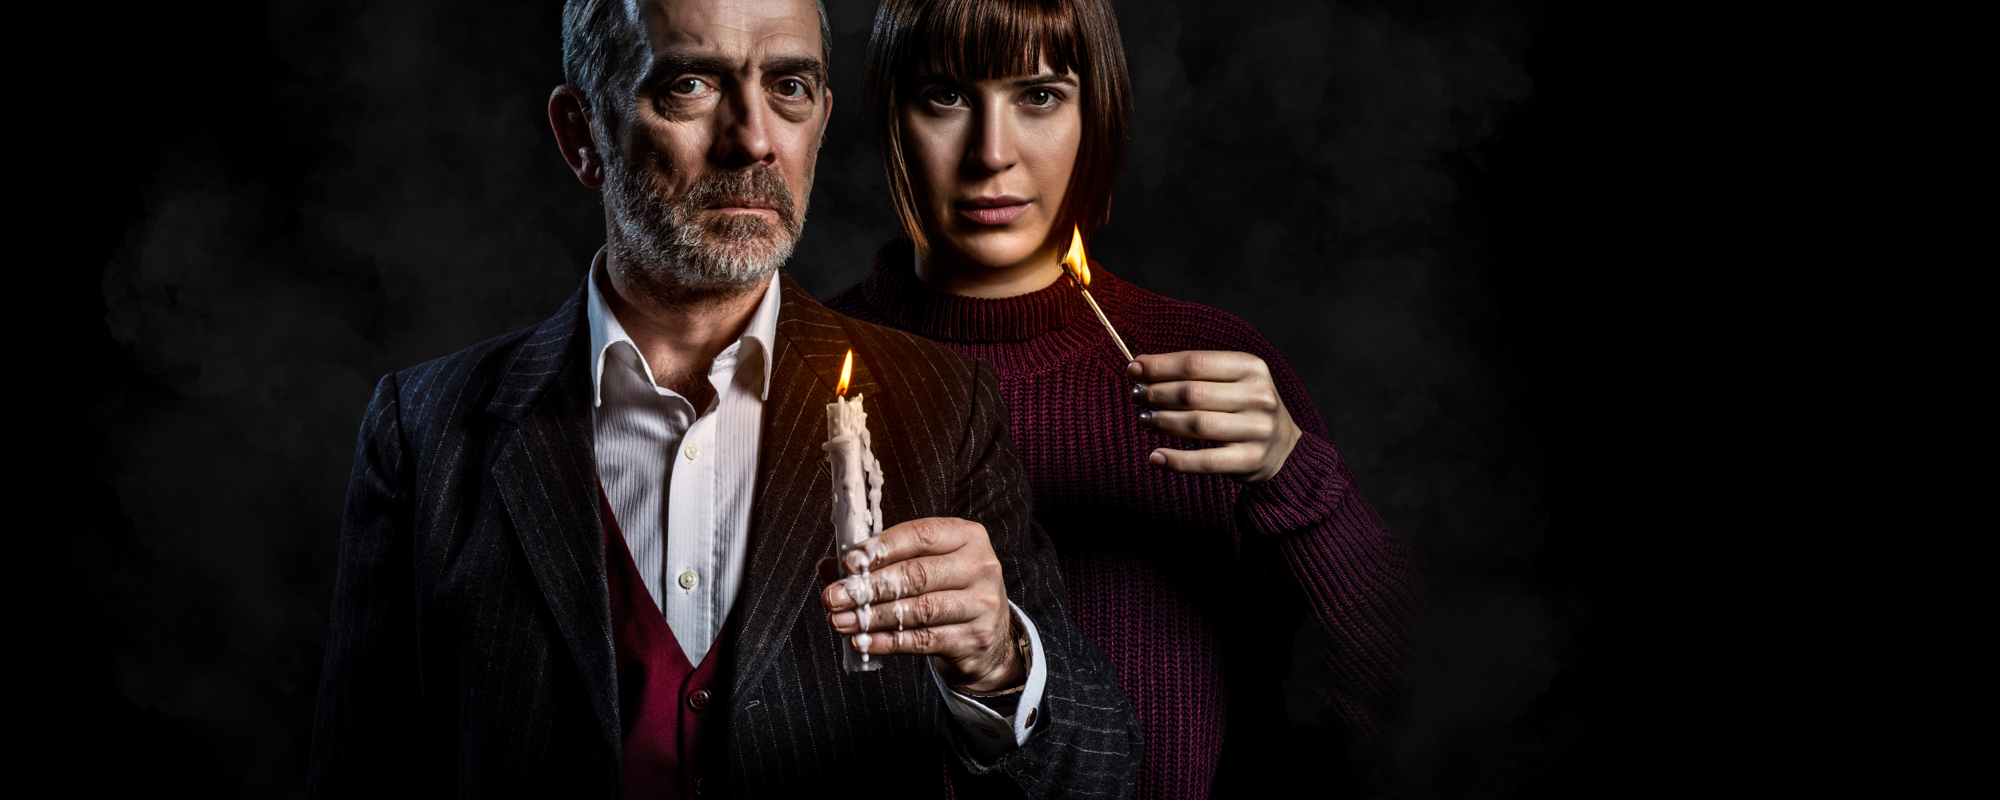 [IMAGE] Two actors stand close behind each other in the dark shadows. One is wearing a three piece suit, and holding a lit tapered candle that drips wax over their hand. The other is wearing a purple knitted jumper, and holds a lit match.